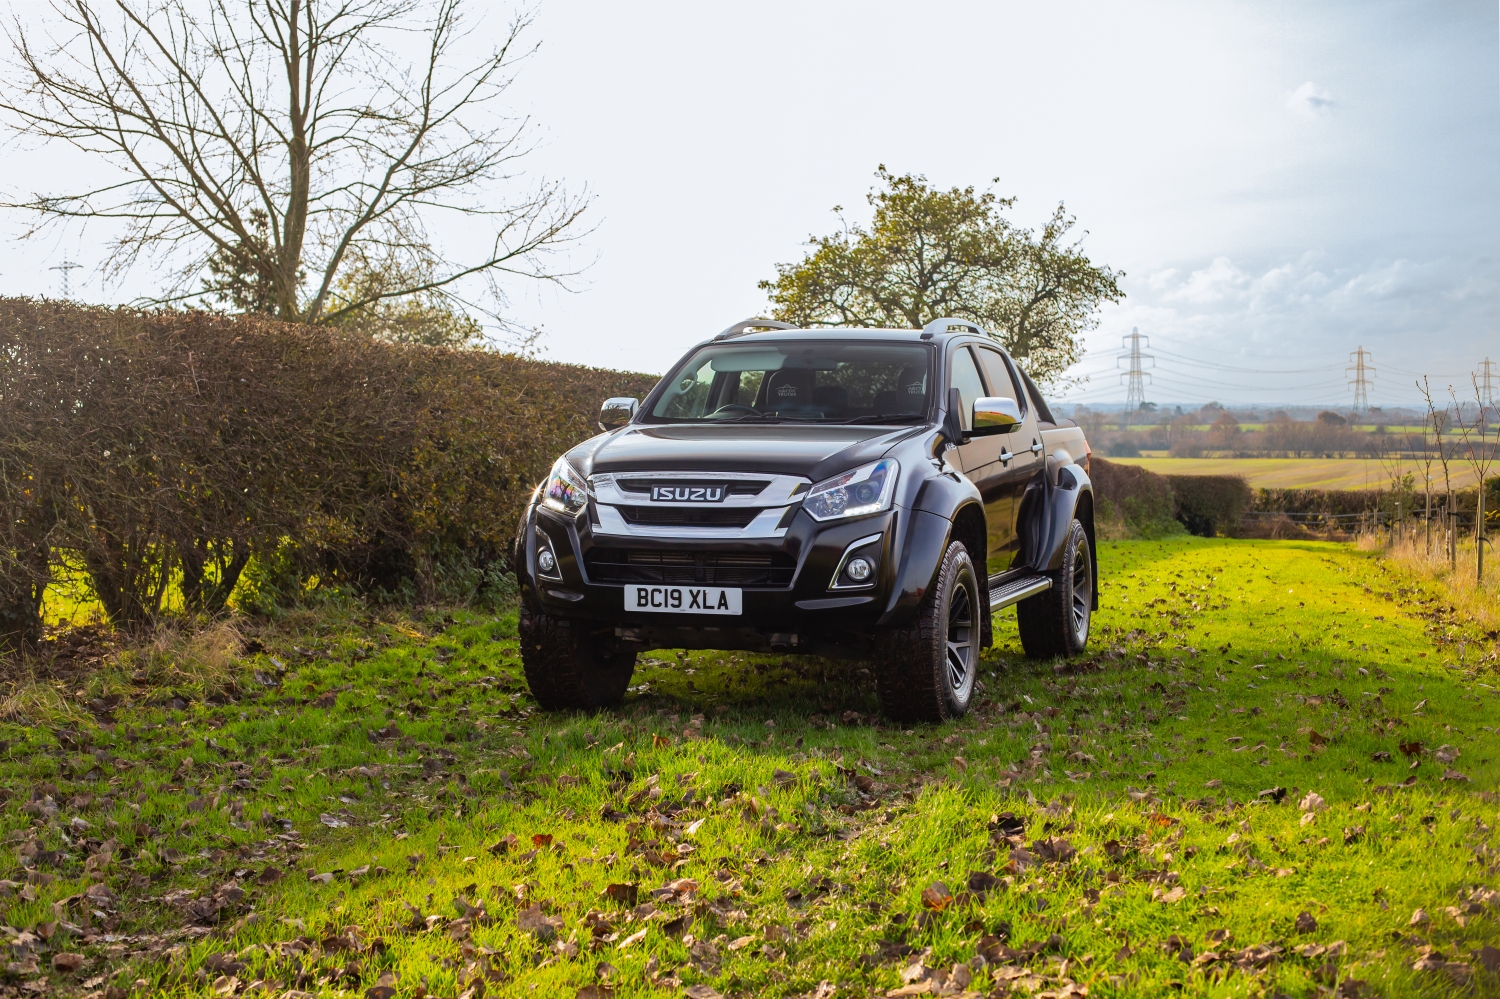 The D-Max is another great off-roader